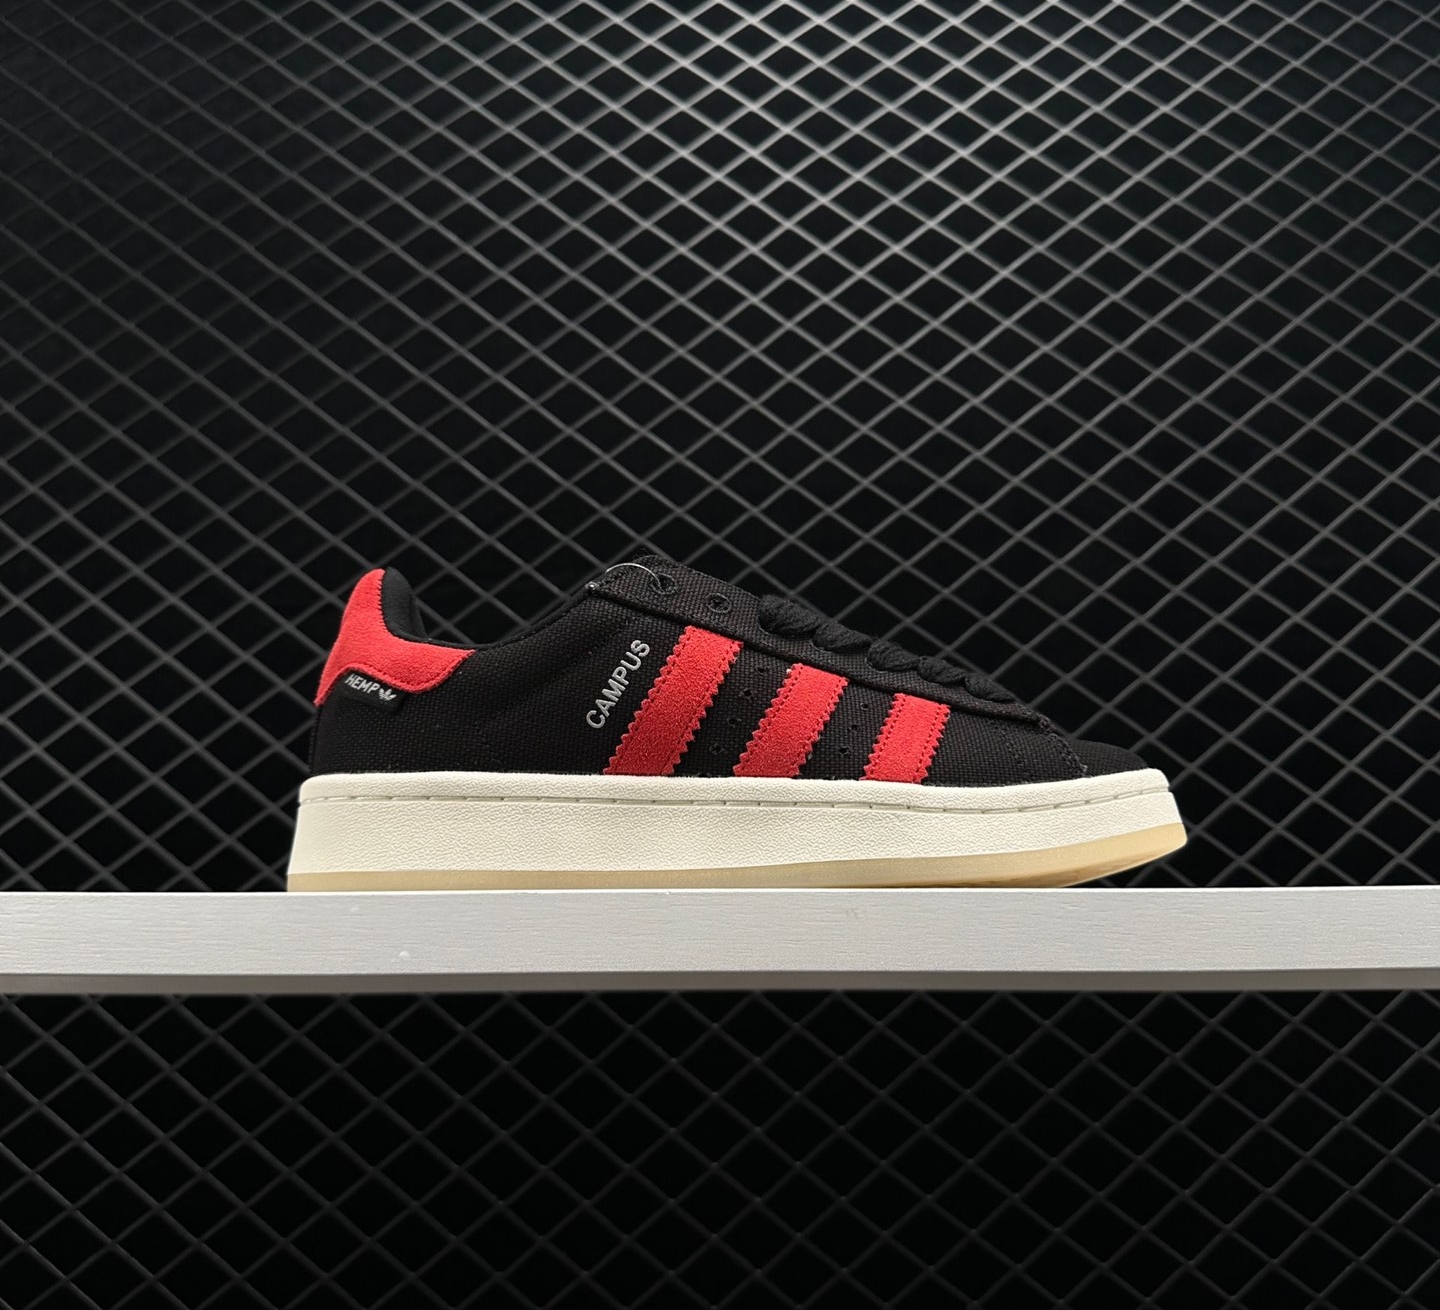 Adidas Campus 00s TKO Black Power Red - Trendy Style from Adidas